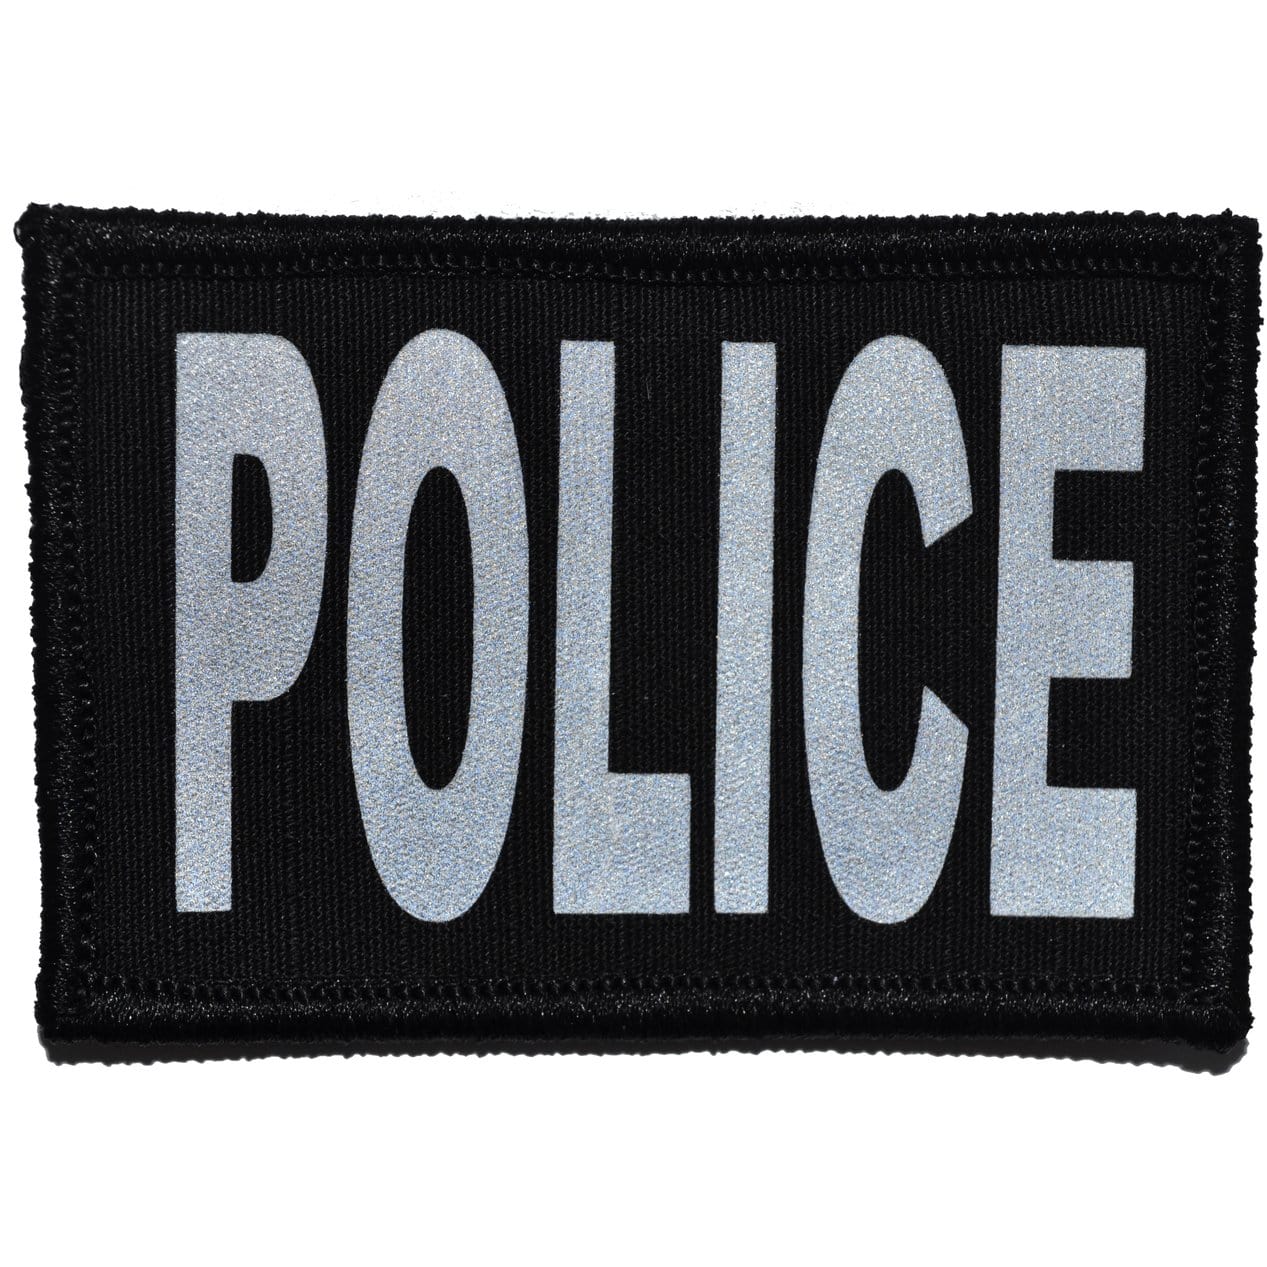 Tactical Gear Junkie Patches Black Police Reflective - 2x3 Patch